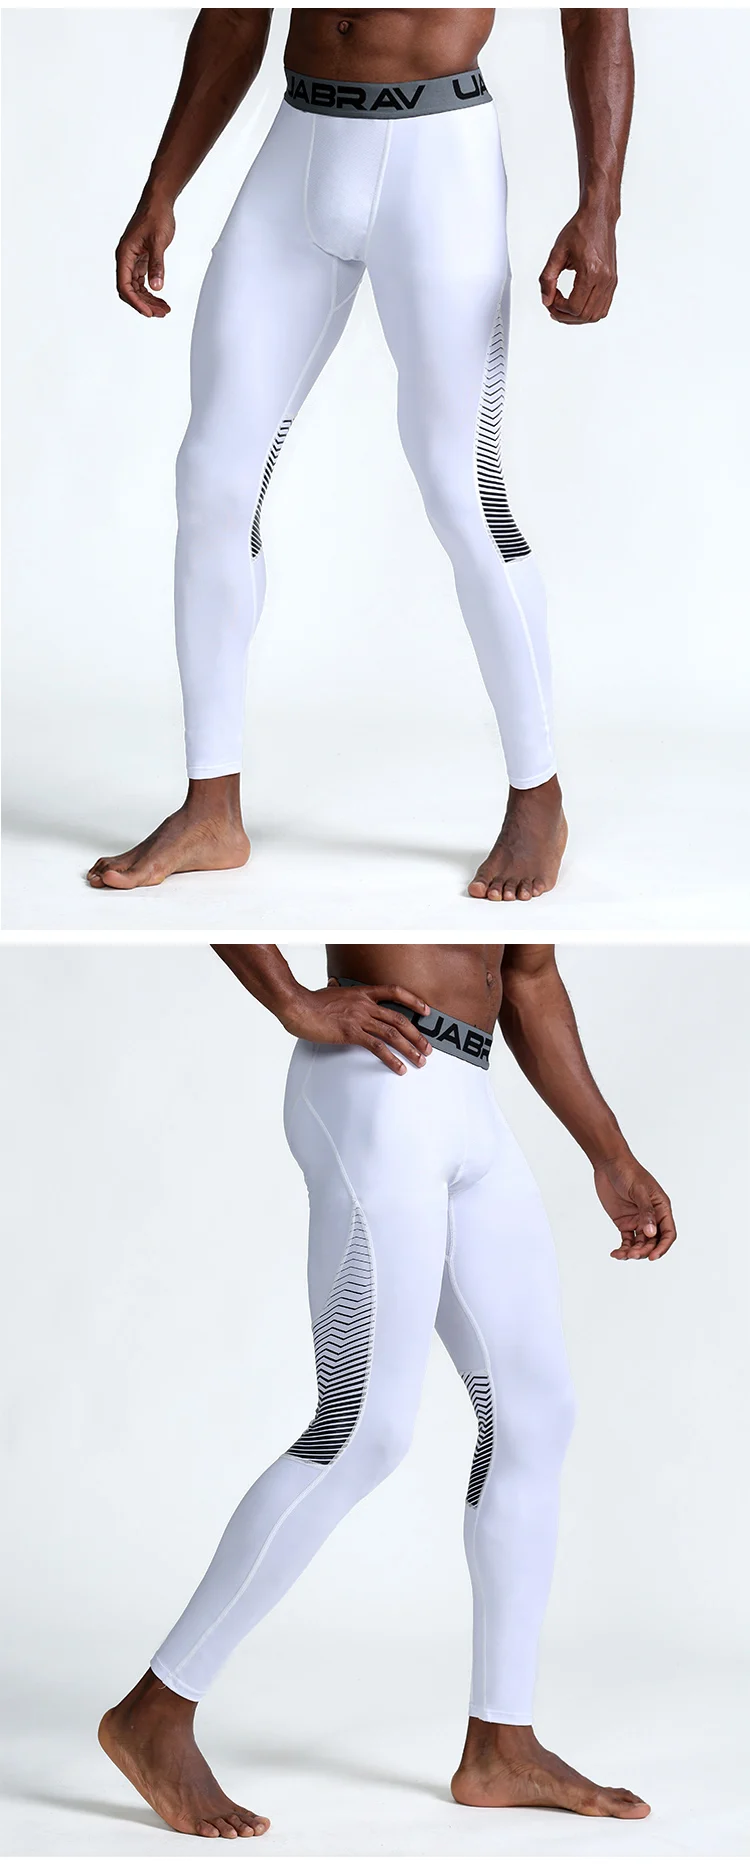 Mens Compression Pants, Compression Tights for Men, Compression Running Tights, Mens White Compression Pants, Compression Workout Pants, White Compression Tights Mens, White Basketball Compression Pants, Black and White Compression Pants